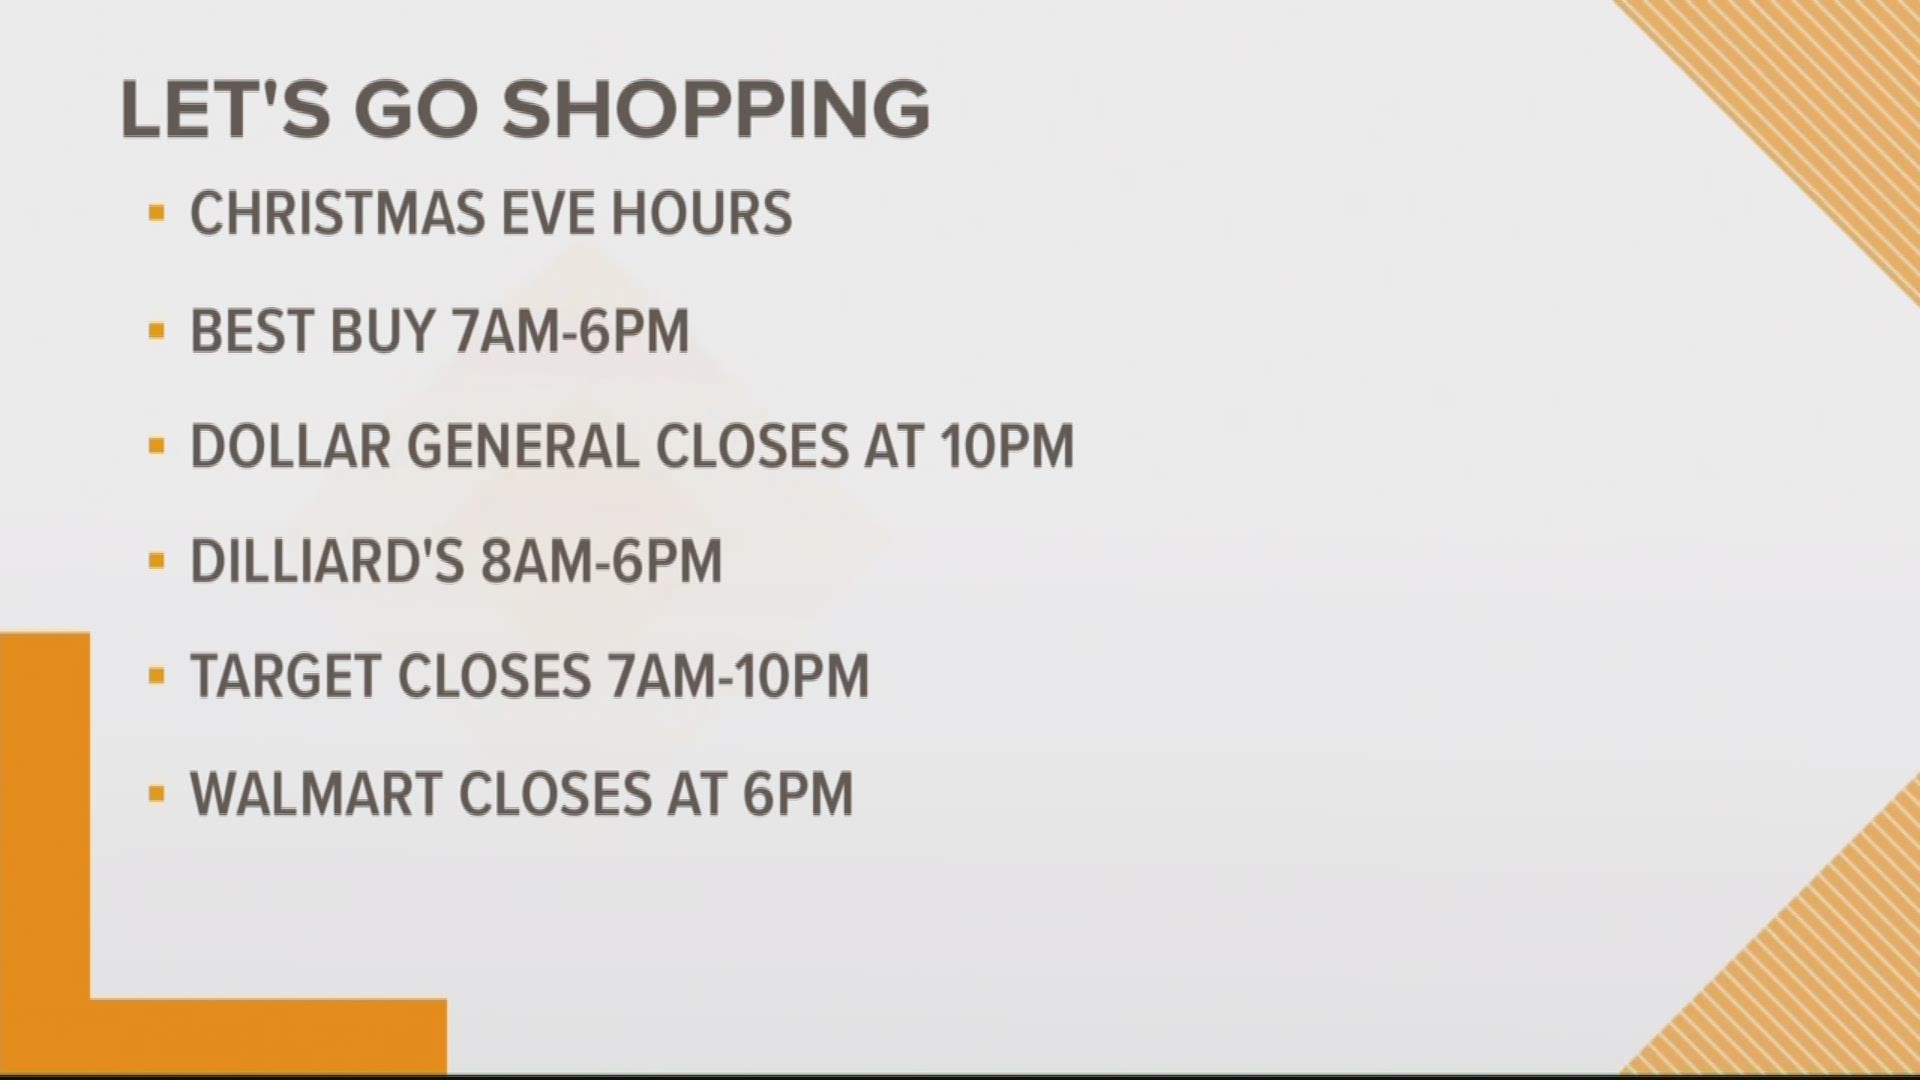 If you didn't finish up your holiday shopping over the weekend, you're not alone. Thousands plan to flood retail stores leading up to Christmas Eve.